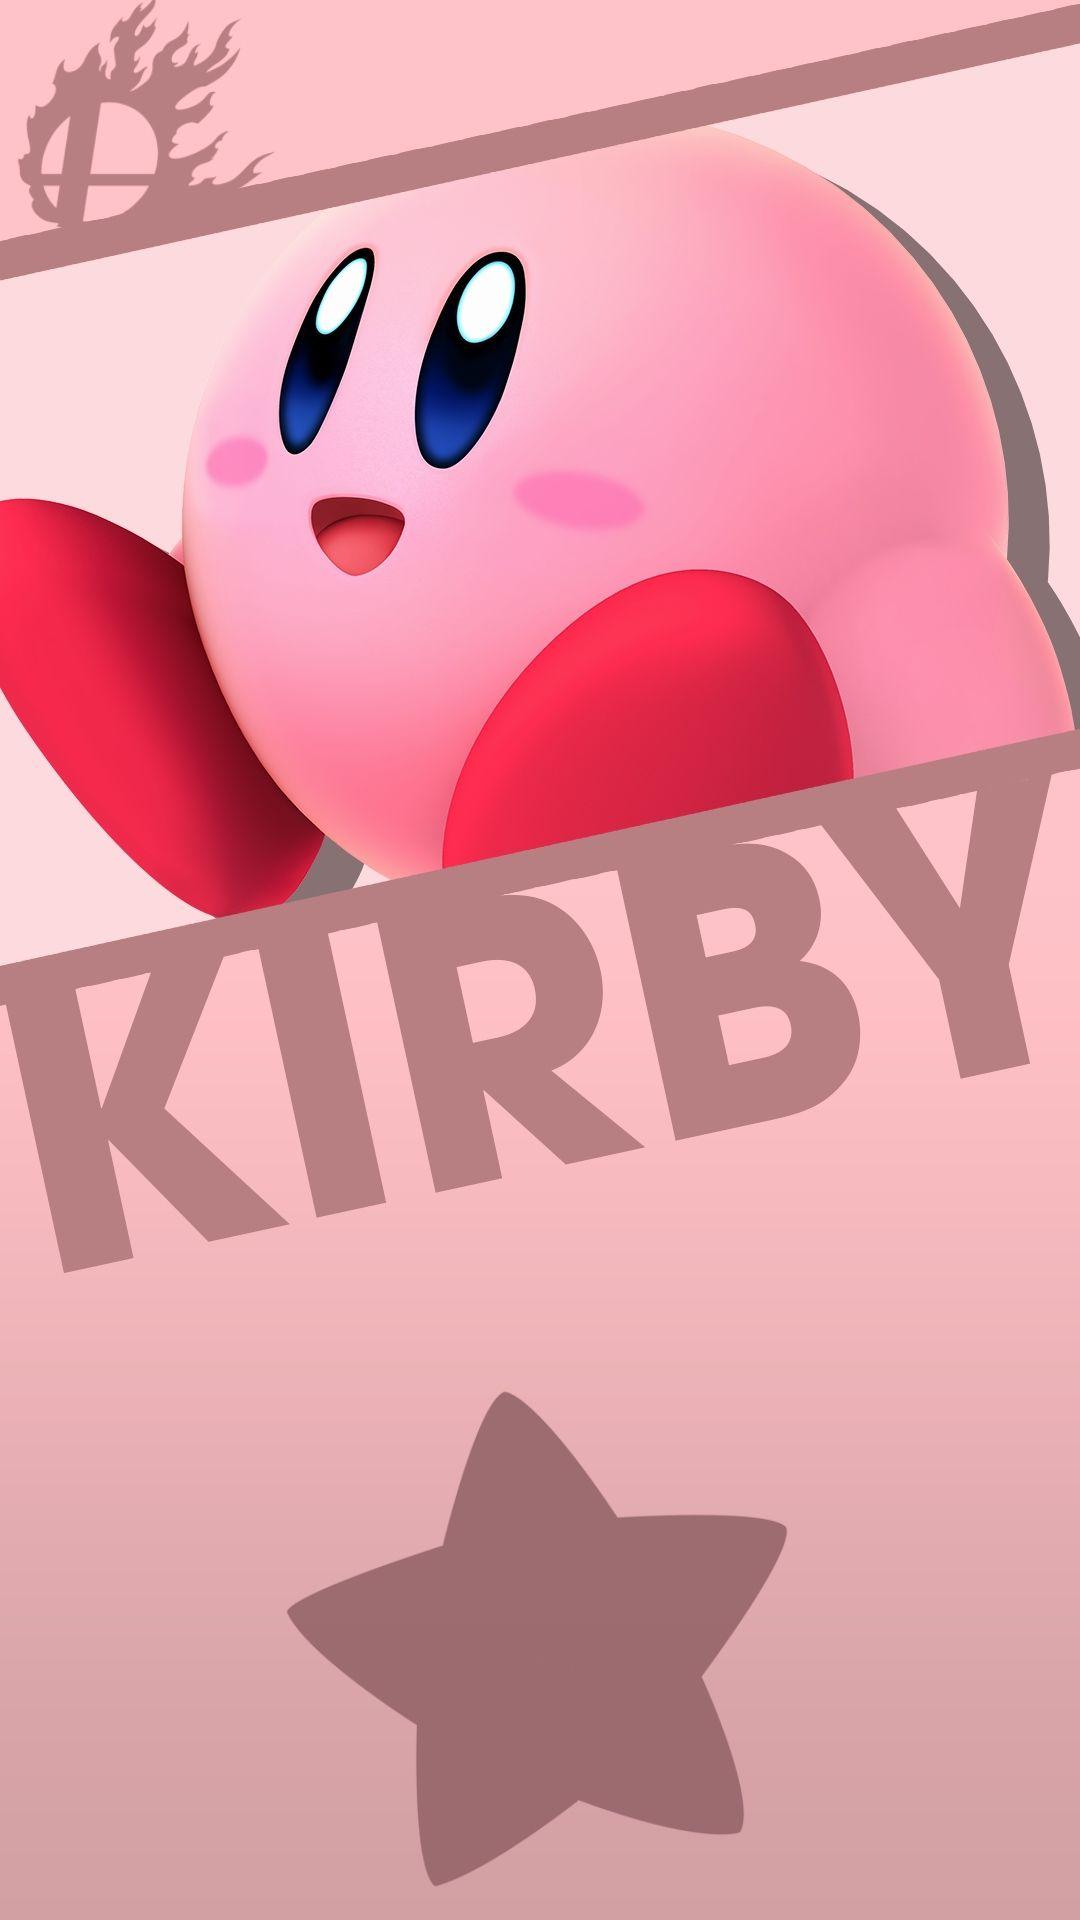 This months Patreon phone wallpaper available for HD download And I hope  everyone had a wonderful new years  kirby nintendo  Instagram